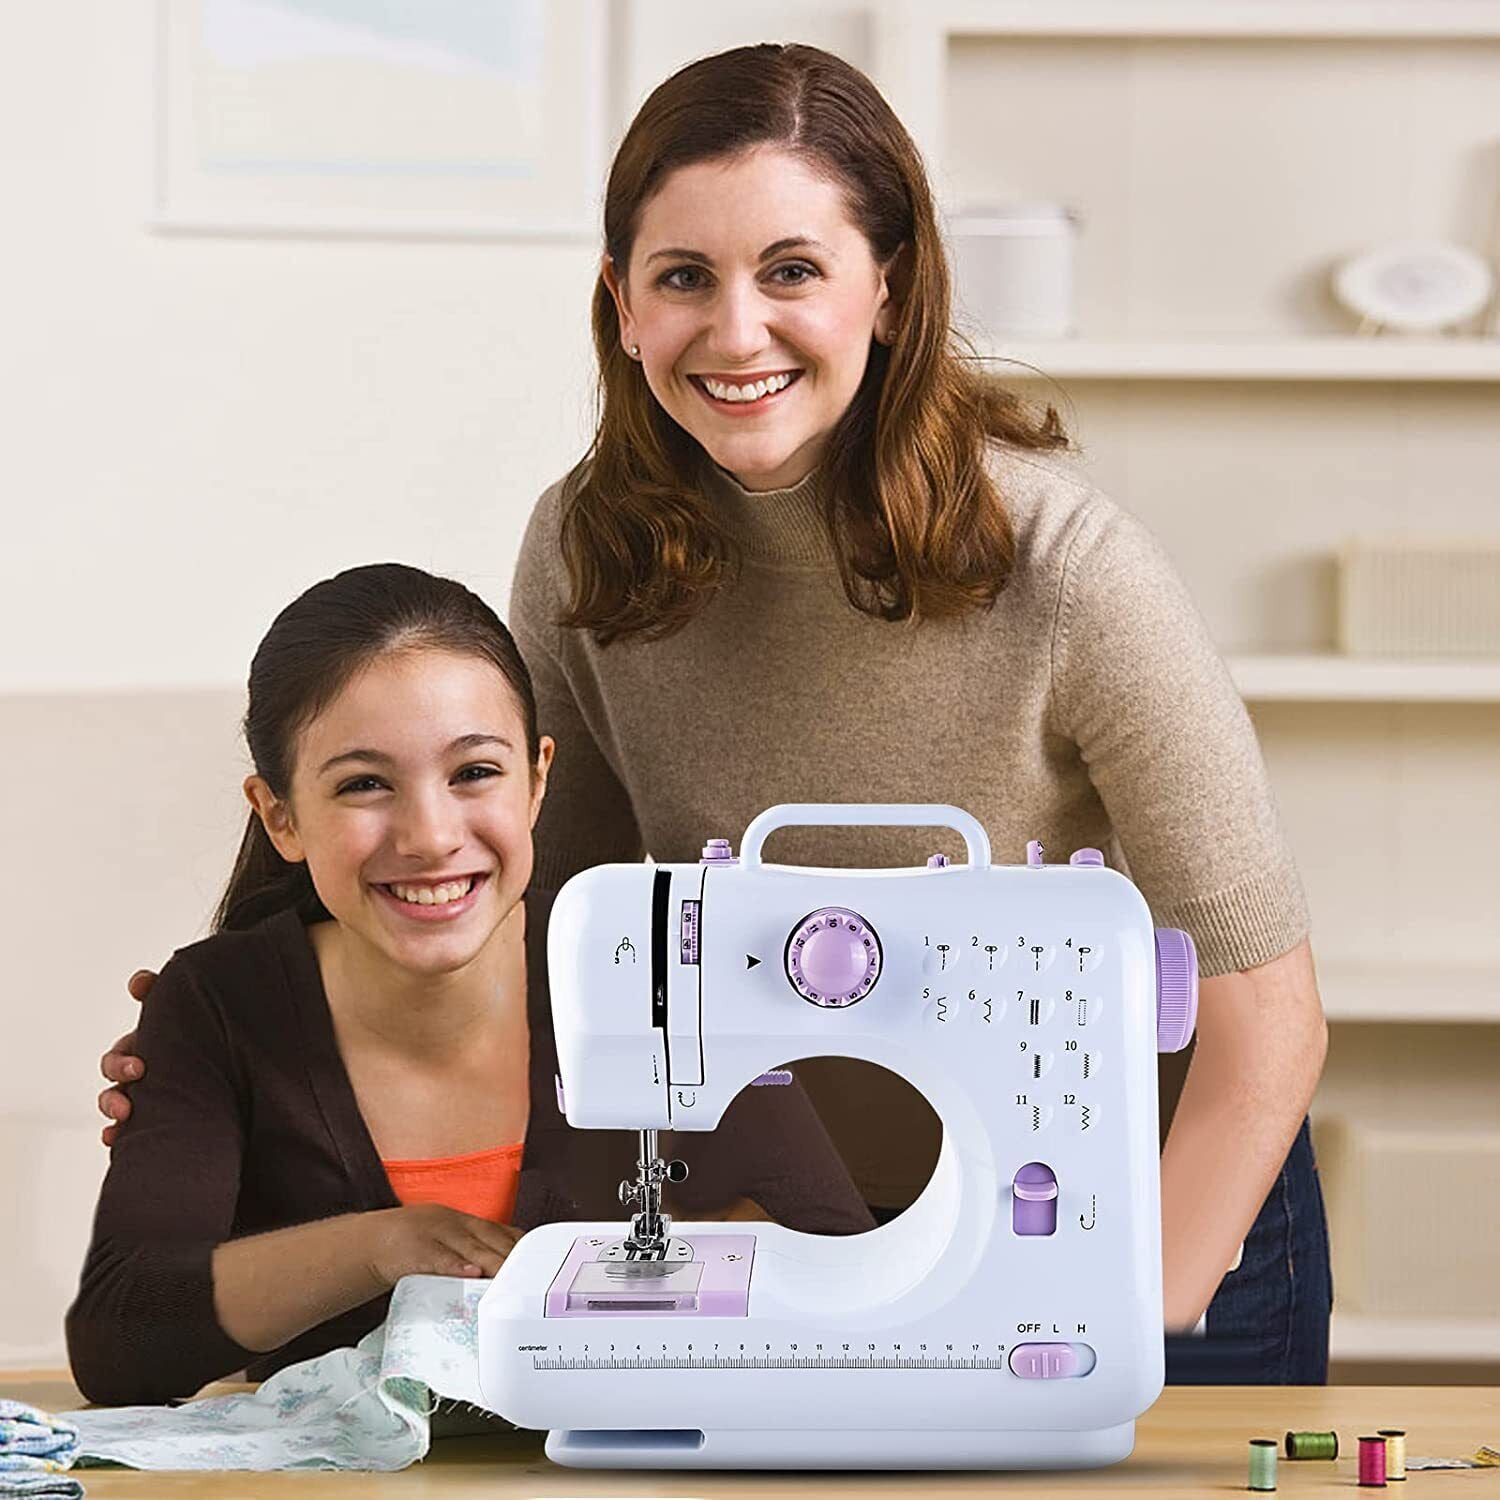 Teen/Adult - Get to Know Your Sewing Machine